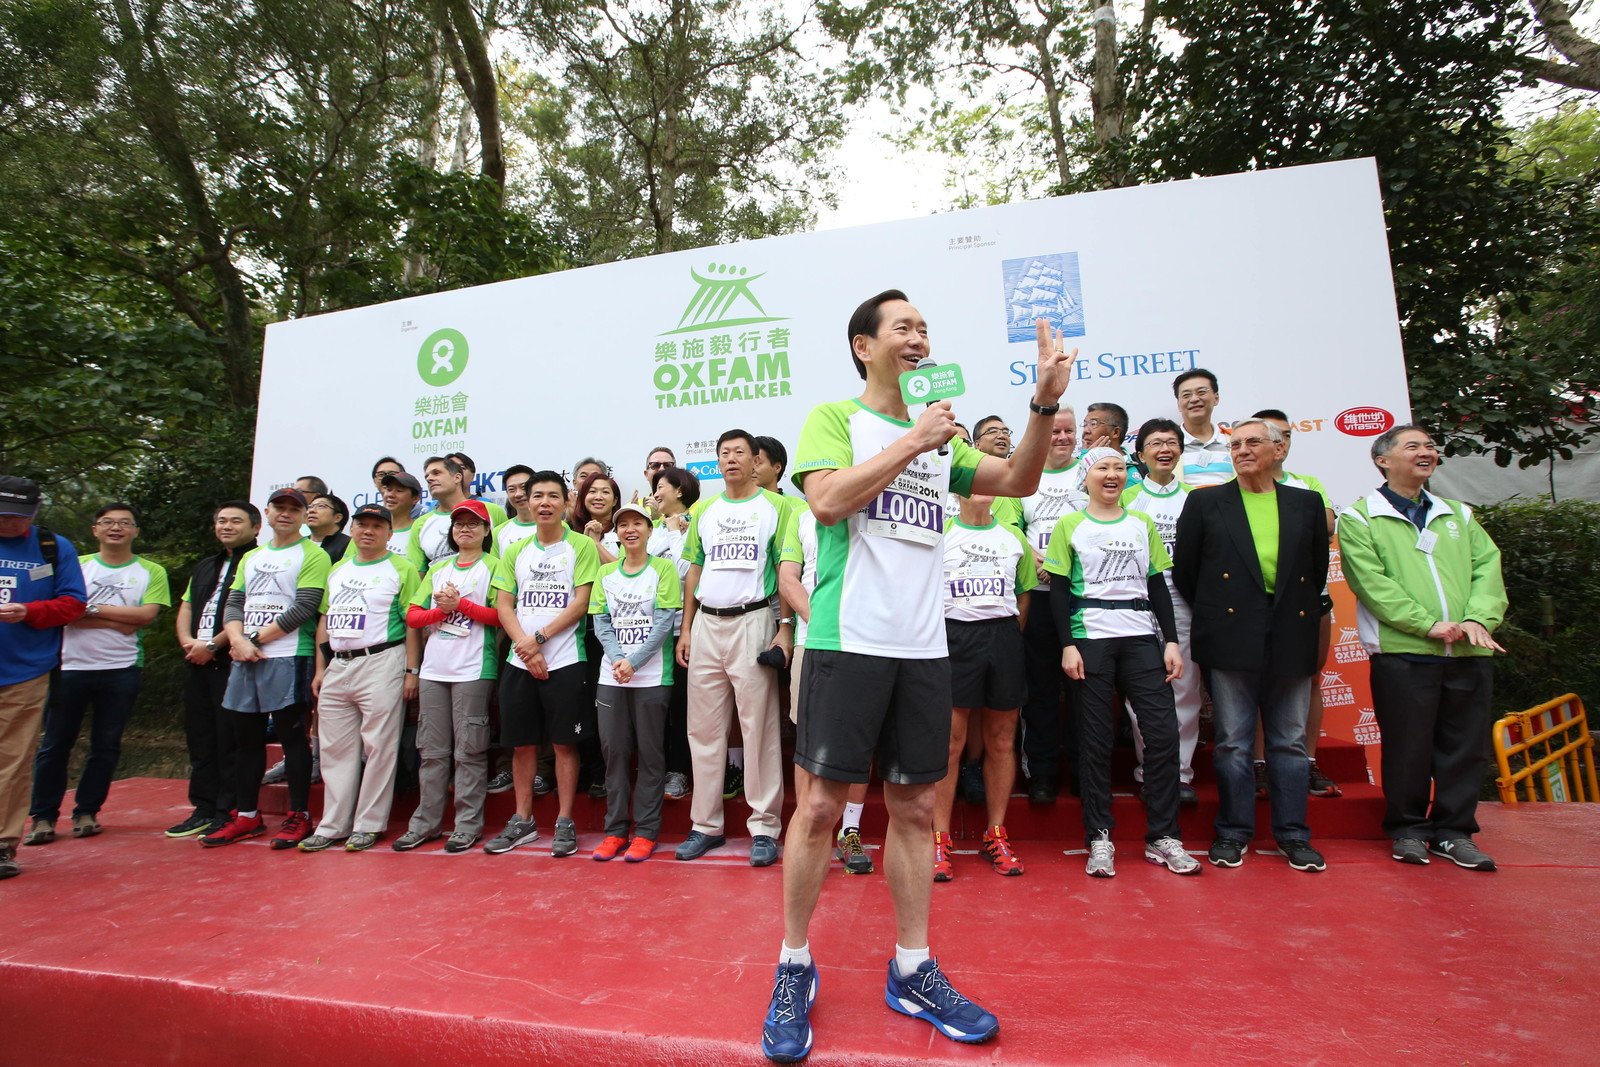 Bernard Chan, Chair of Oxfam Trailwalker Advisory Committee, delivering the welcome speech at the Oxfam Trailwalker 2014 Kick-Off Ceremony.